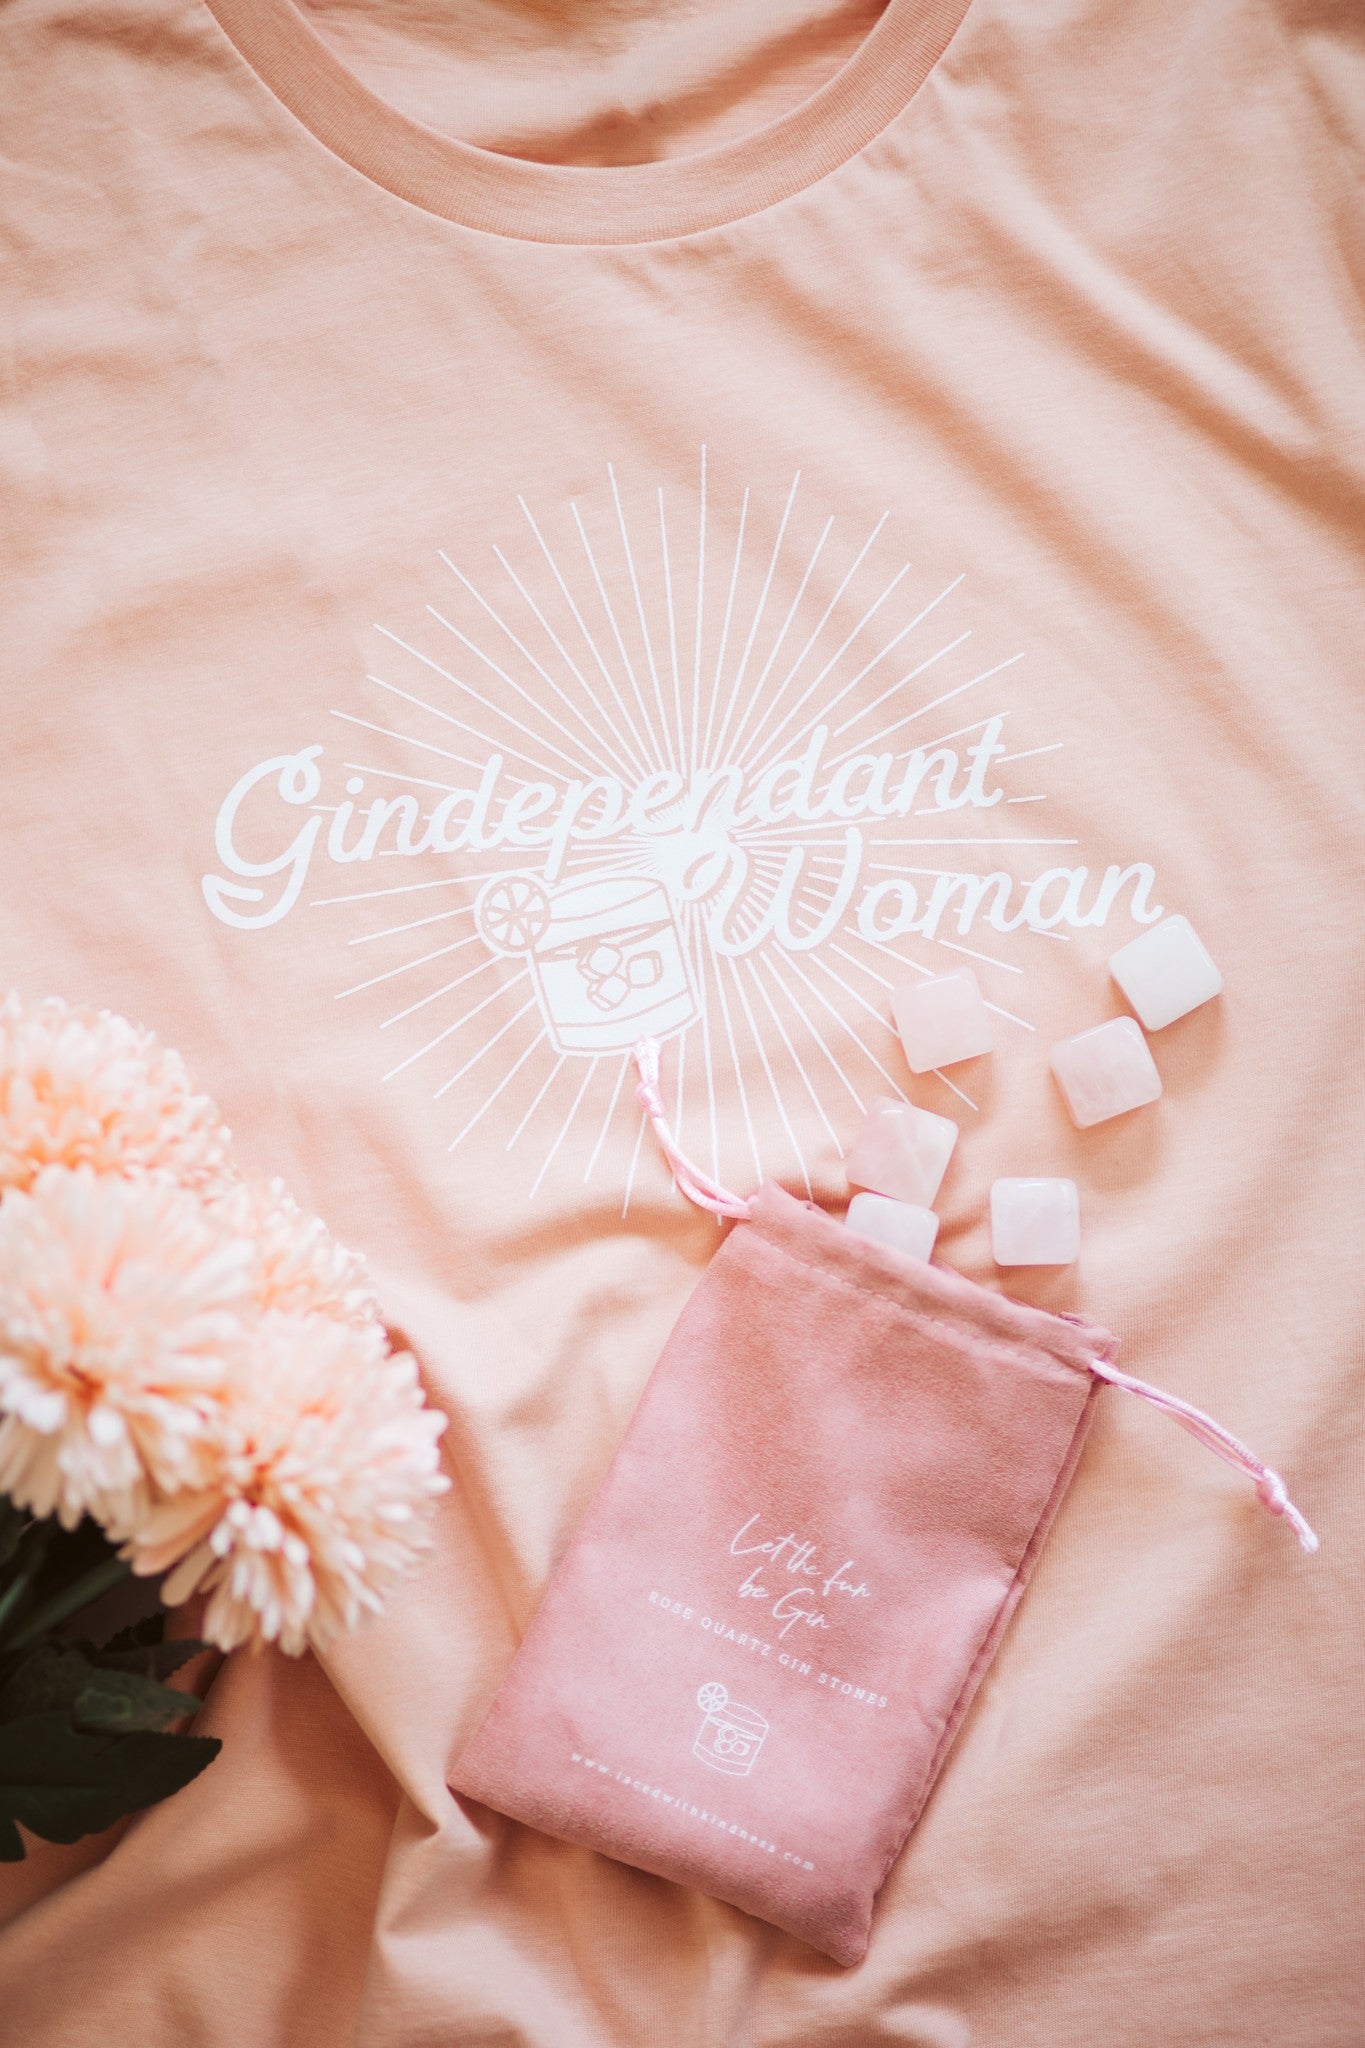 Gindependent Woman tee and a pouch of Rose Quartz Mixer Stones